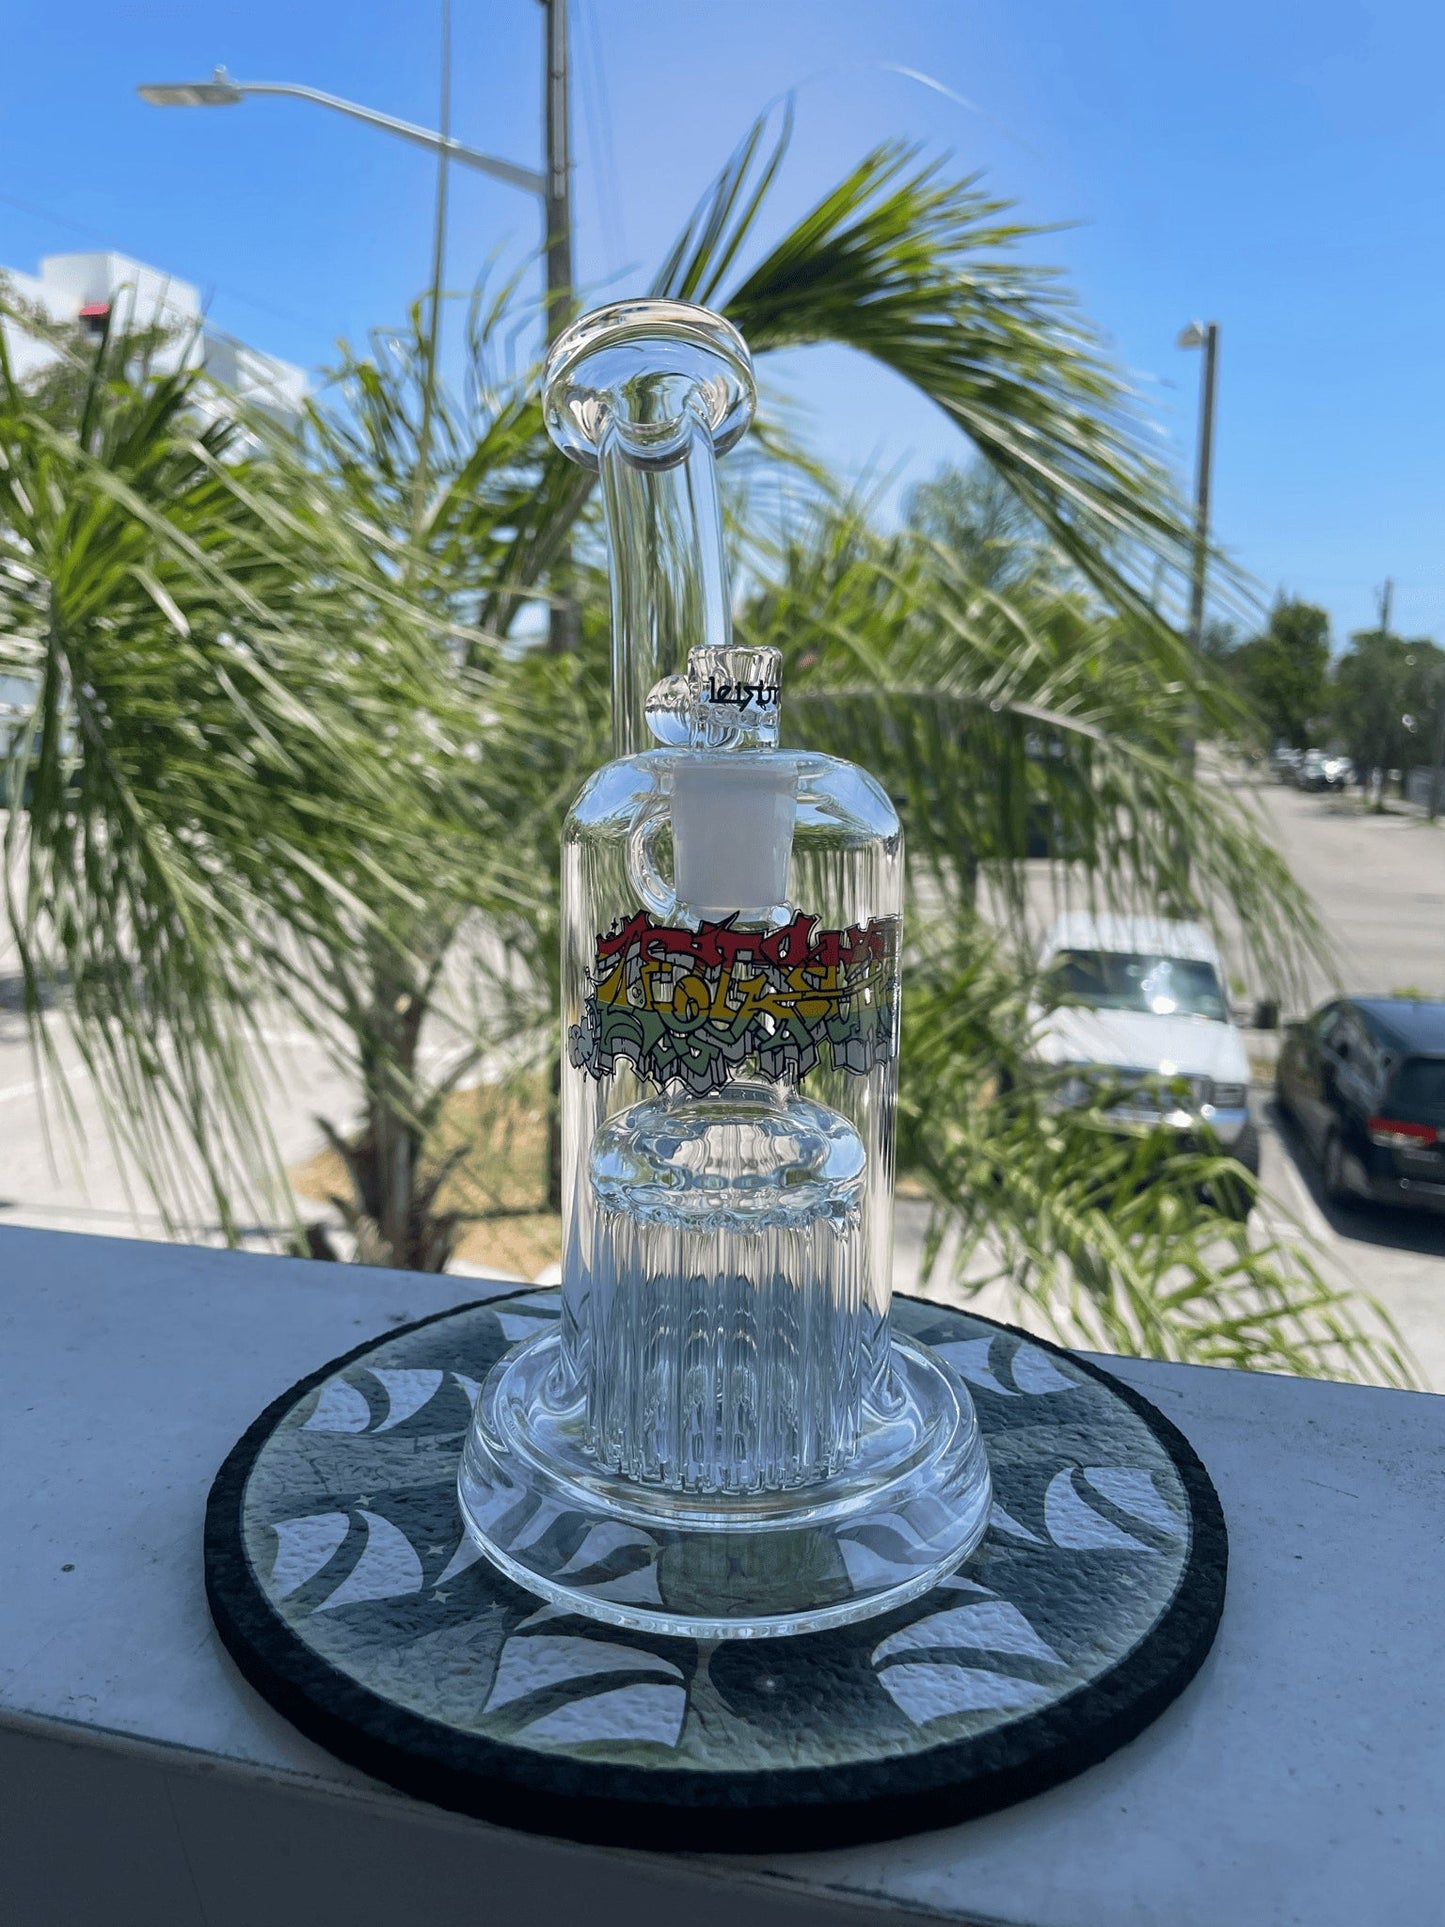 innovative design of the (L8) Leisure 16 arm Rig/Bubbler